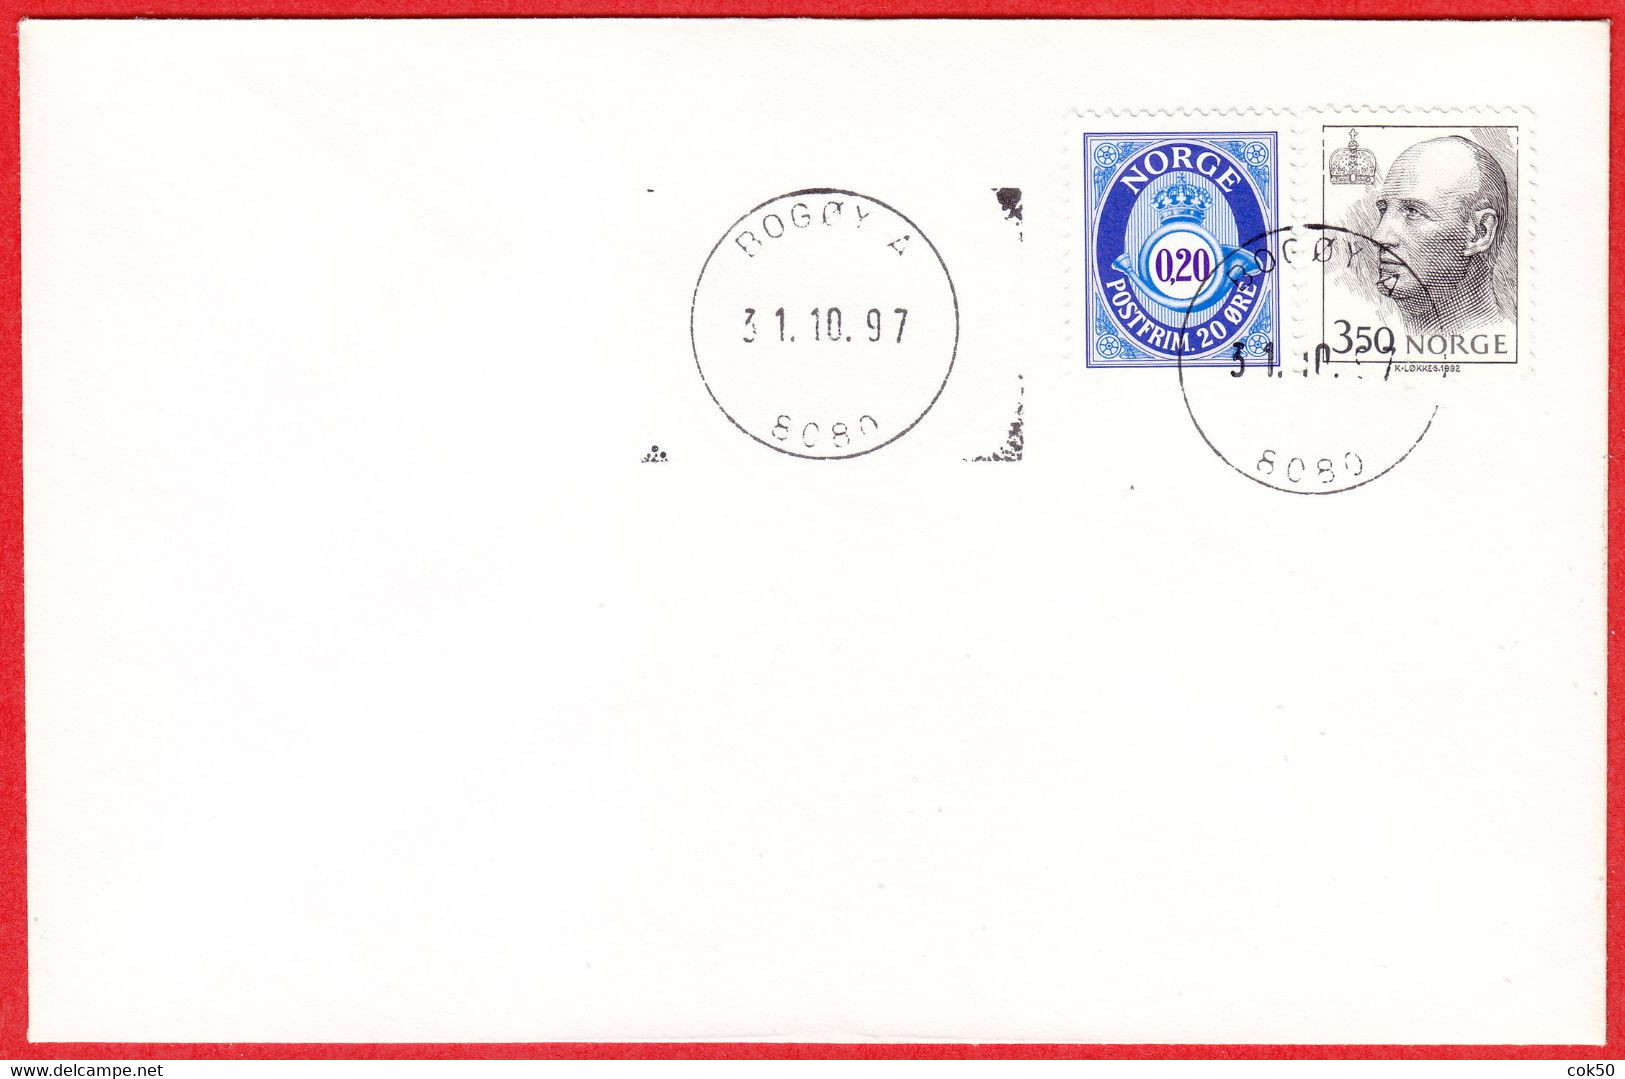 NORWAY -  8080 BOGØY A - 23 MmØ - (Nordland County) - Last Day/postoffice Closed On 1997.10.31 - Local Post Stamps